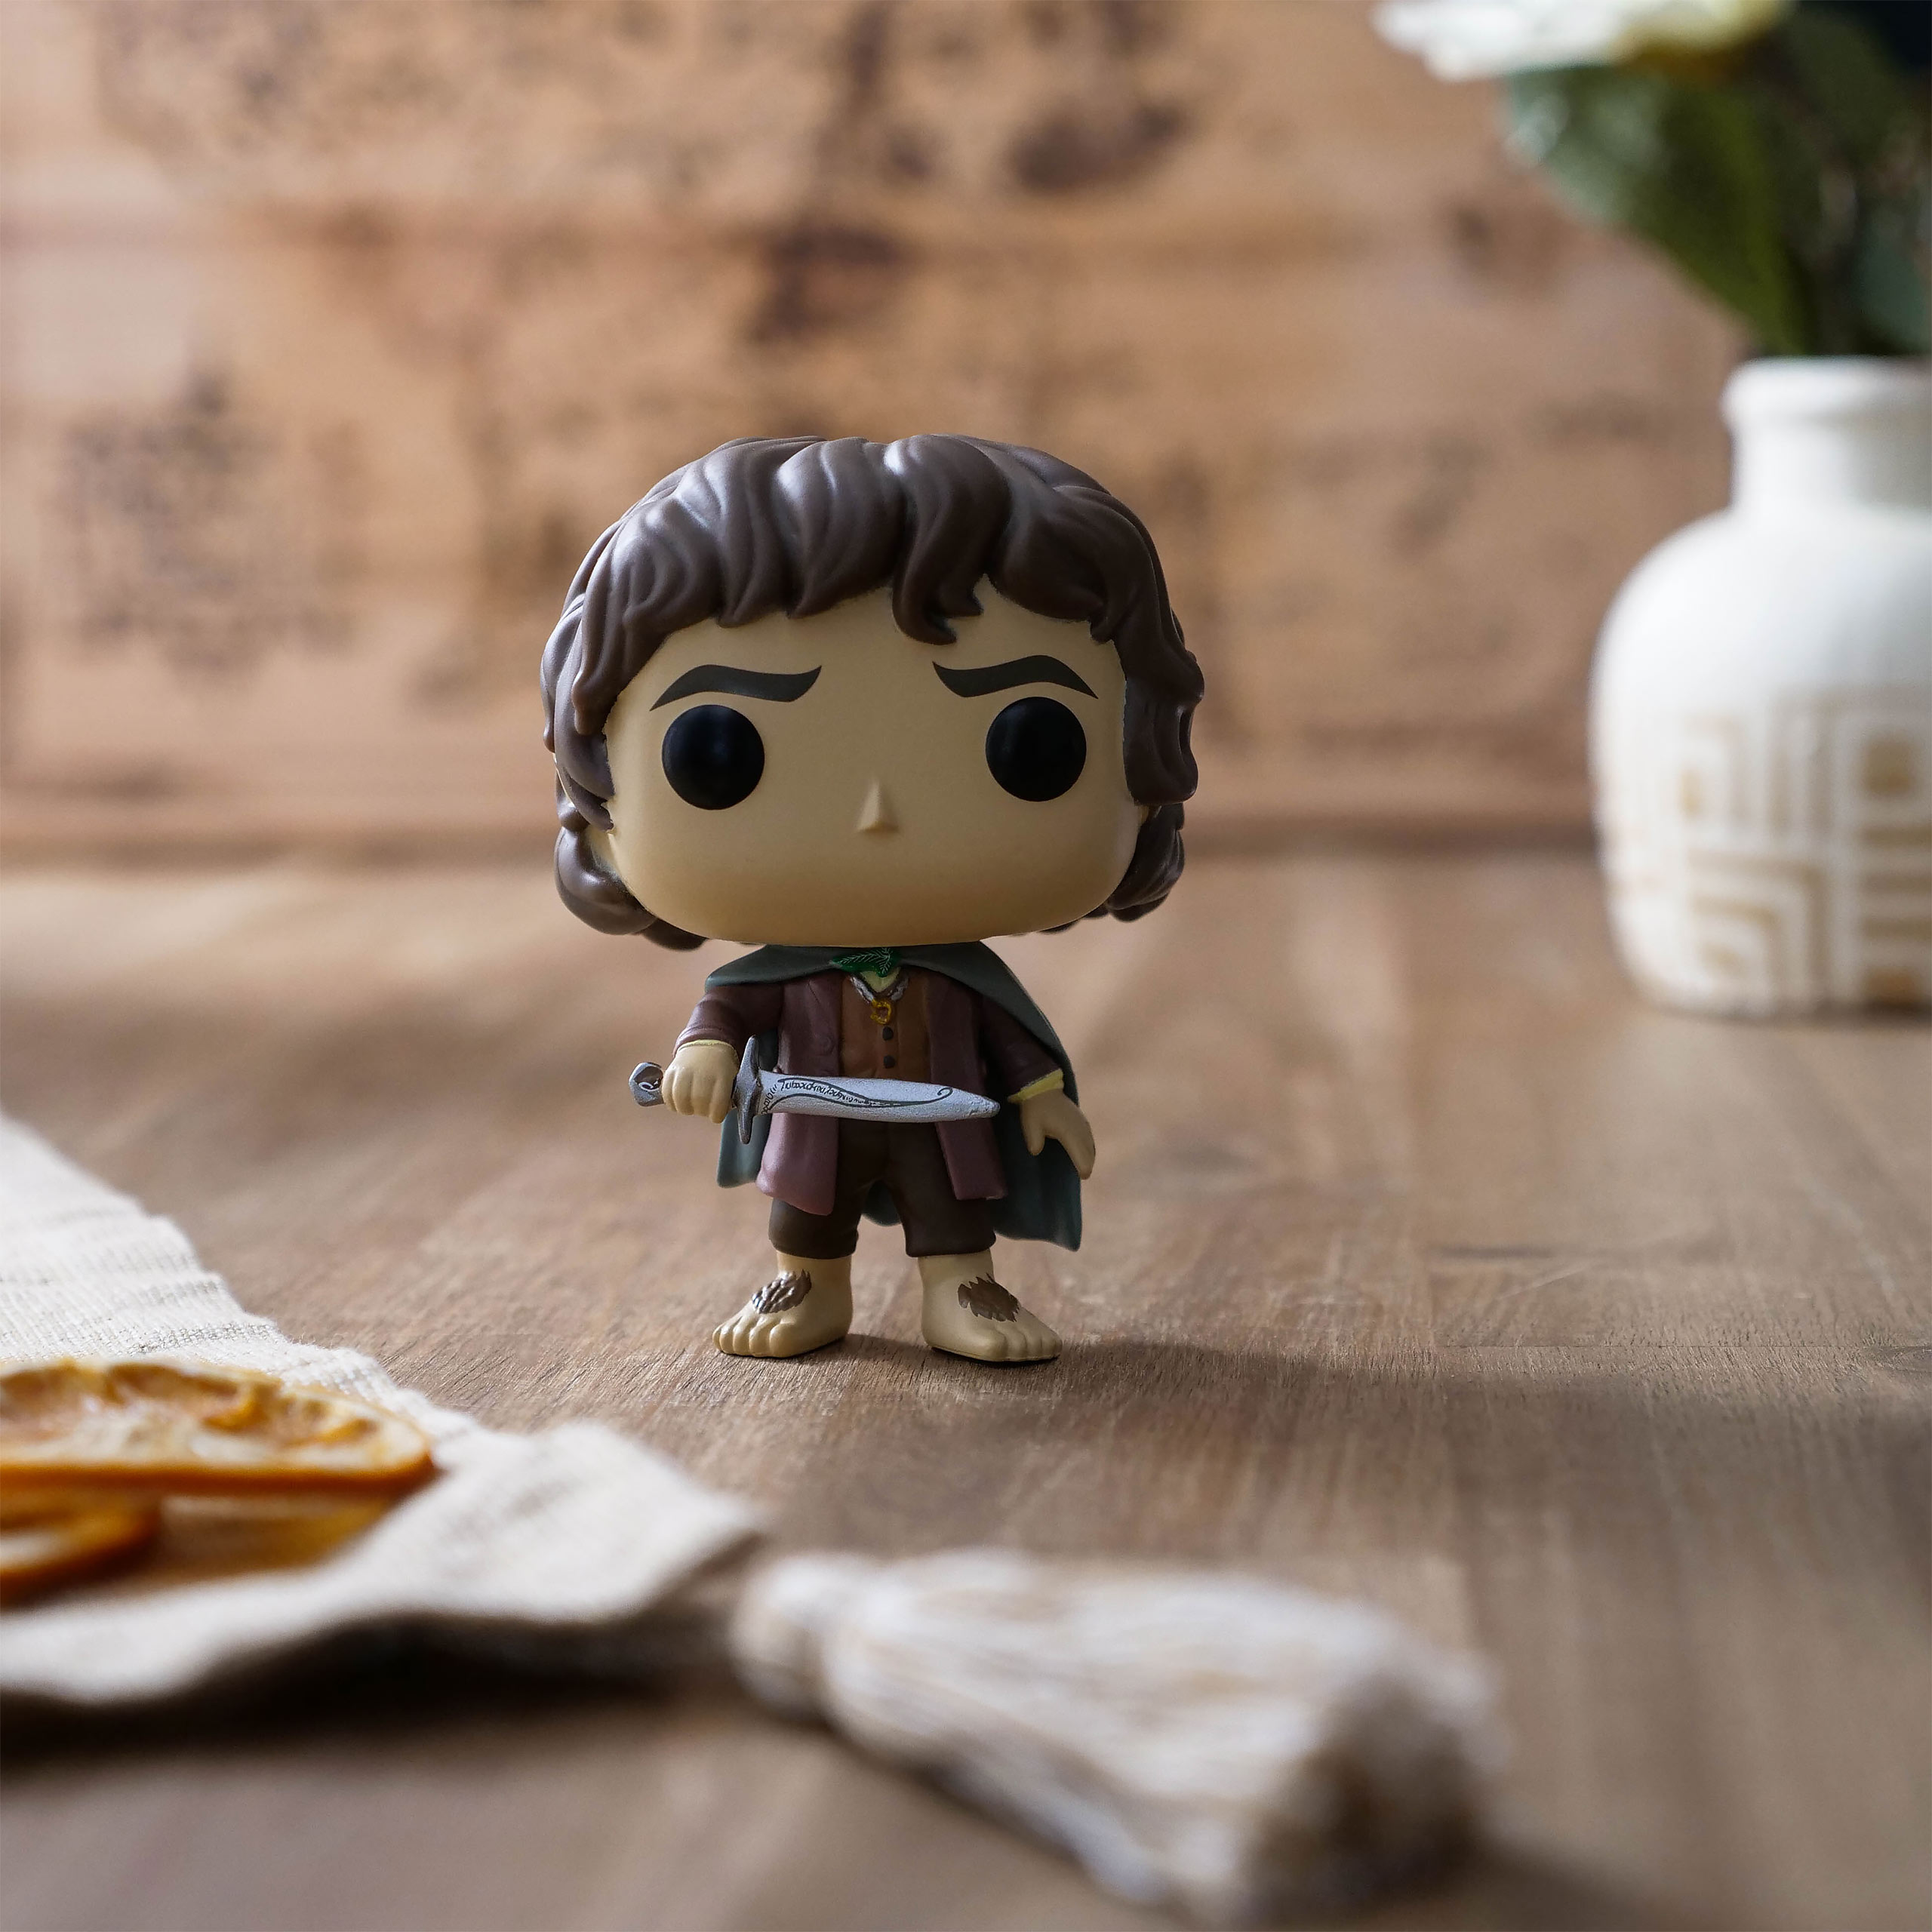 Lord of the Rings - Frodo Funko Pop Figure